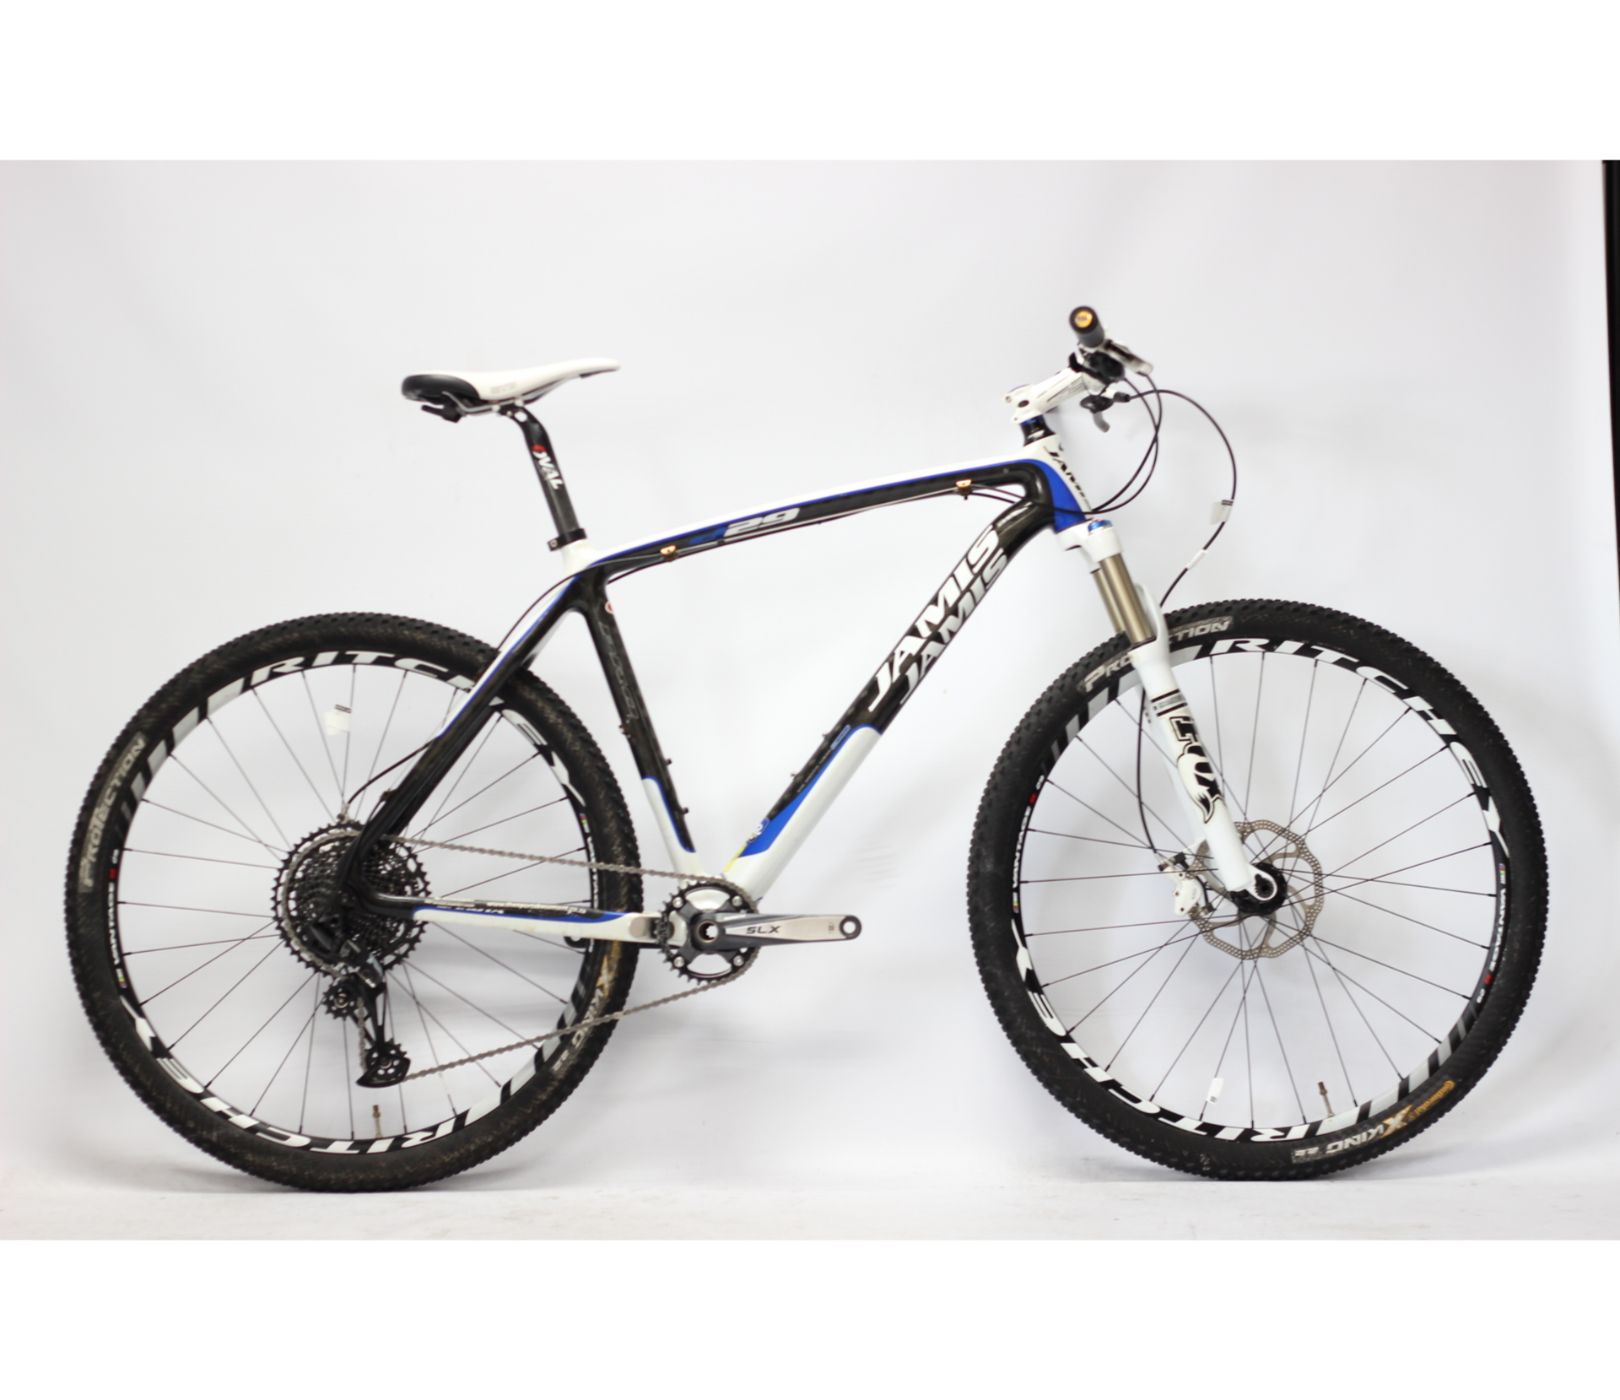 Pre-Owned Jamis Pro Carbon Hardtail Mountain Bike - L